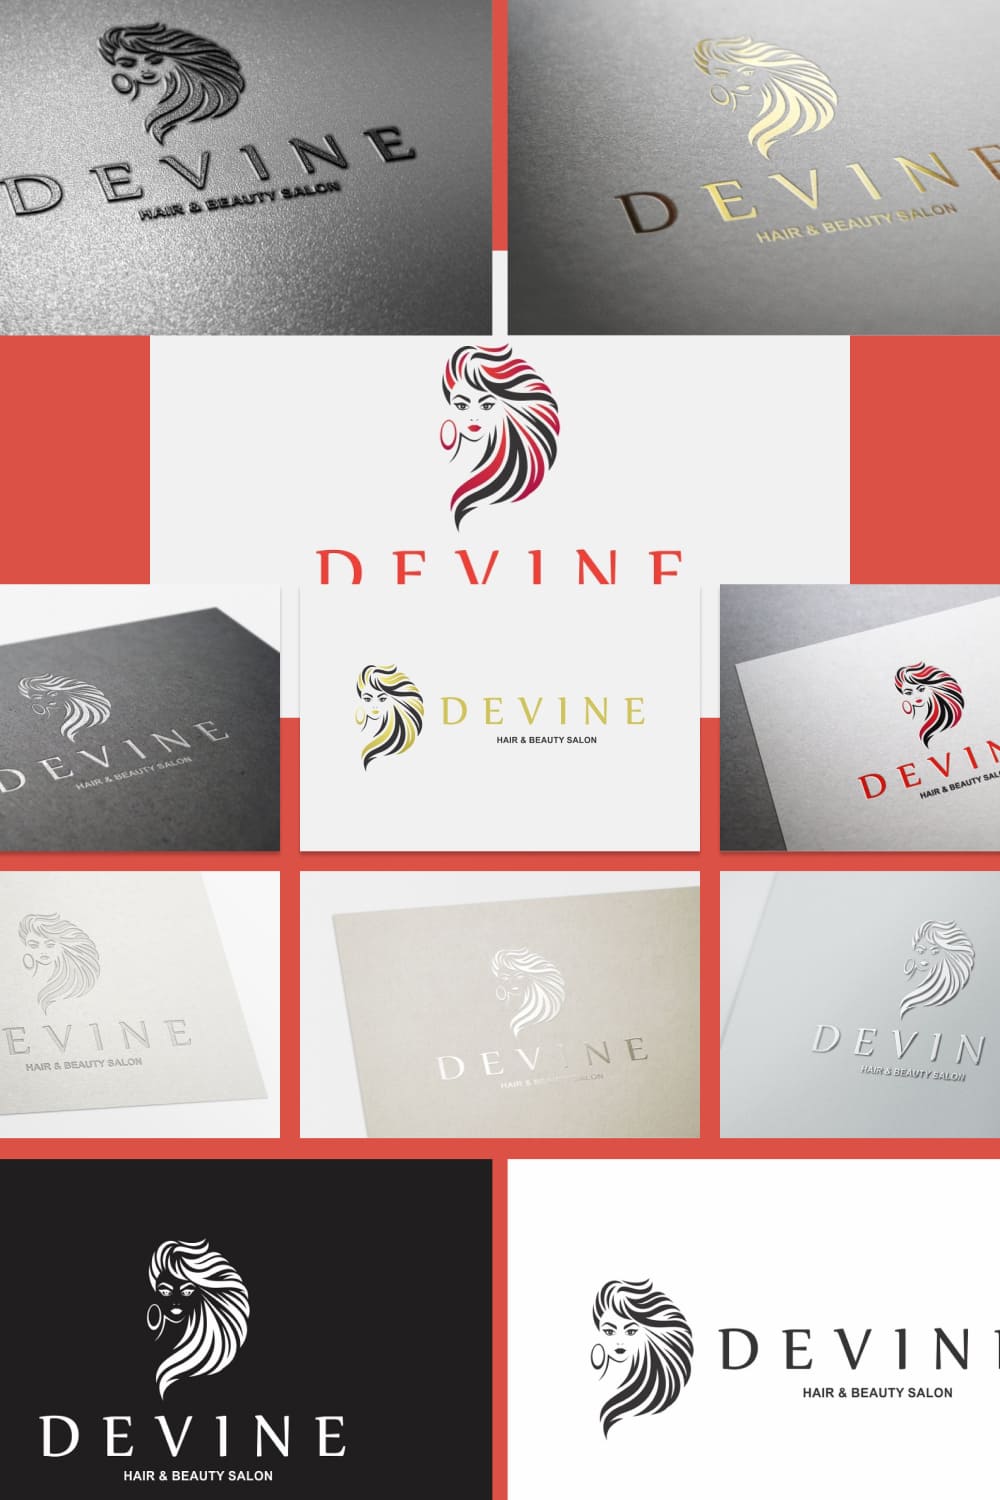 This logo is a great decision for your beauty area.